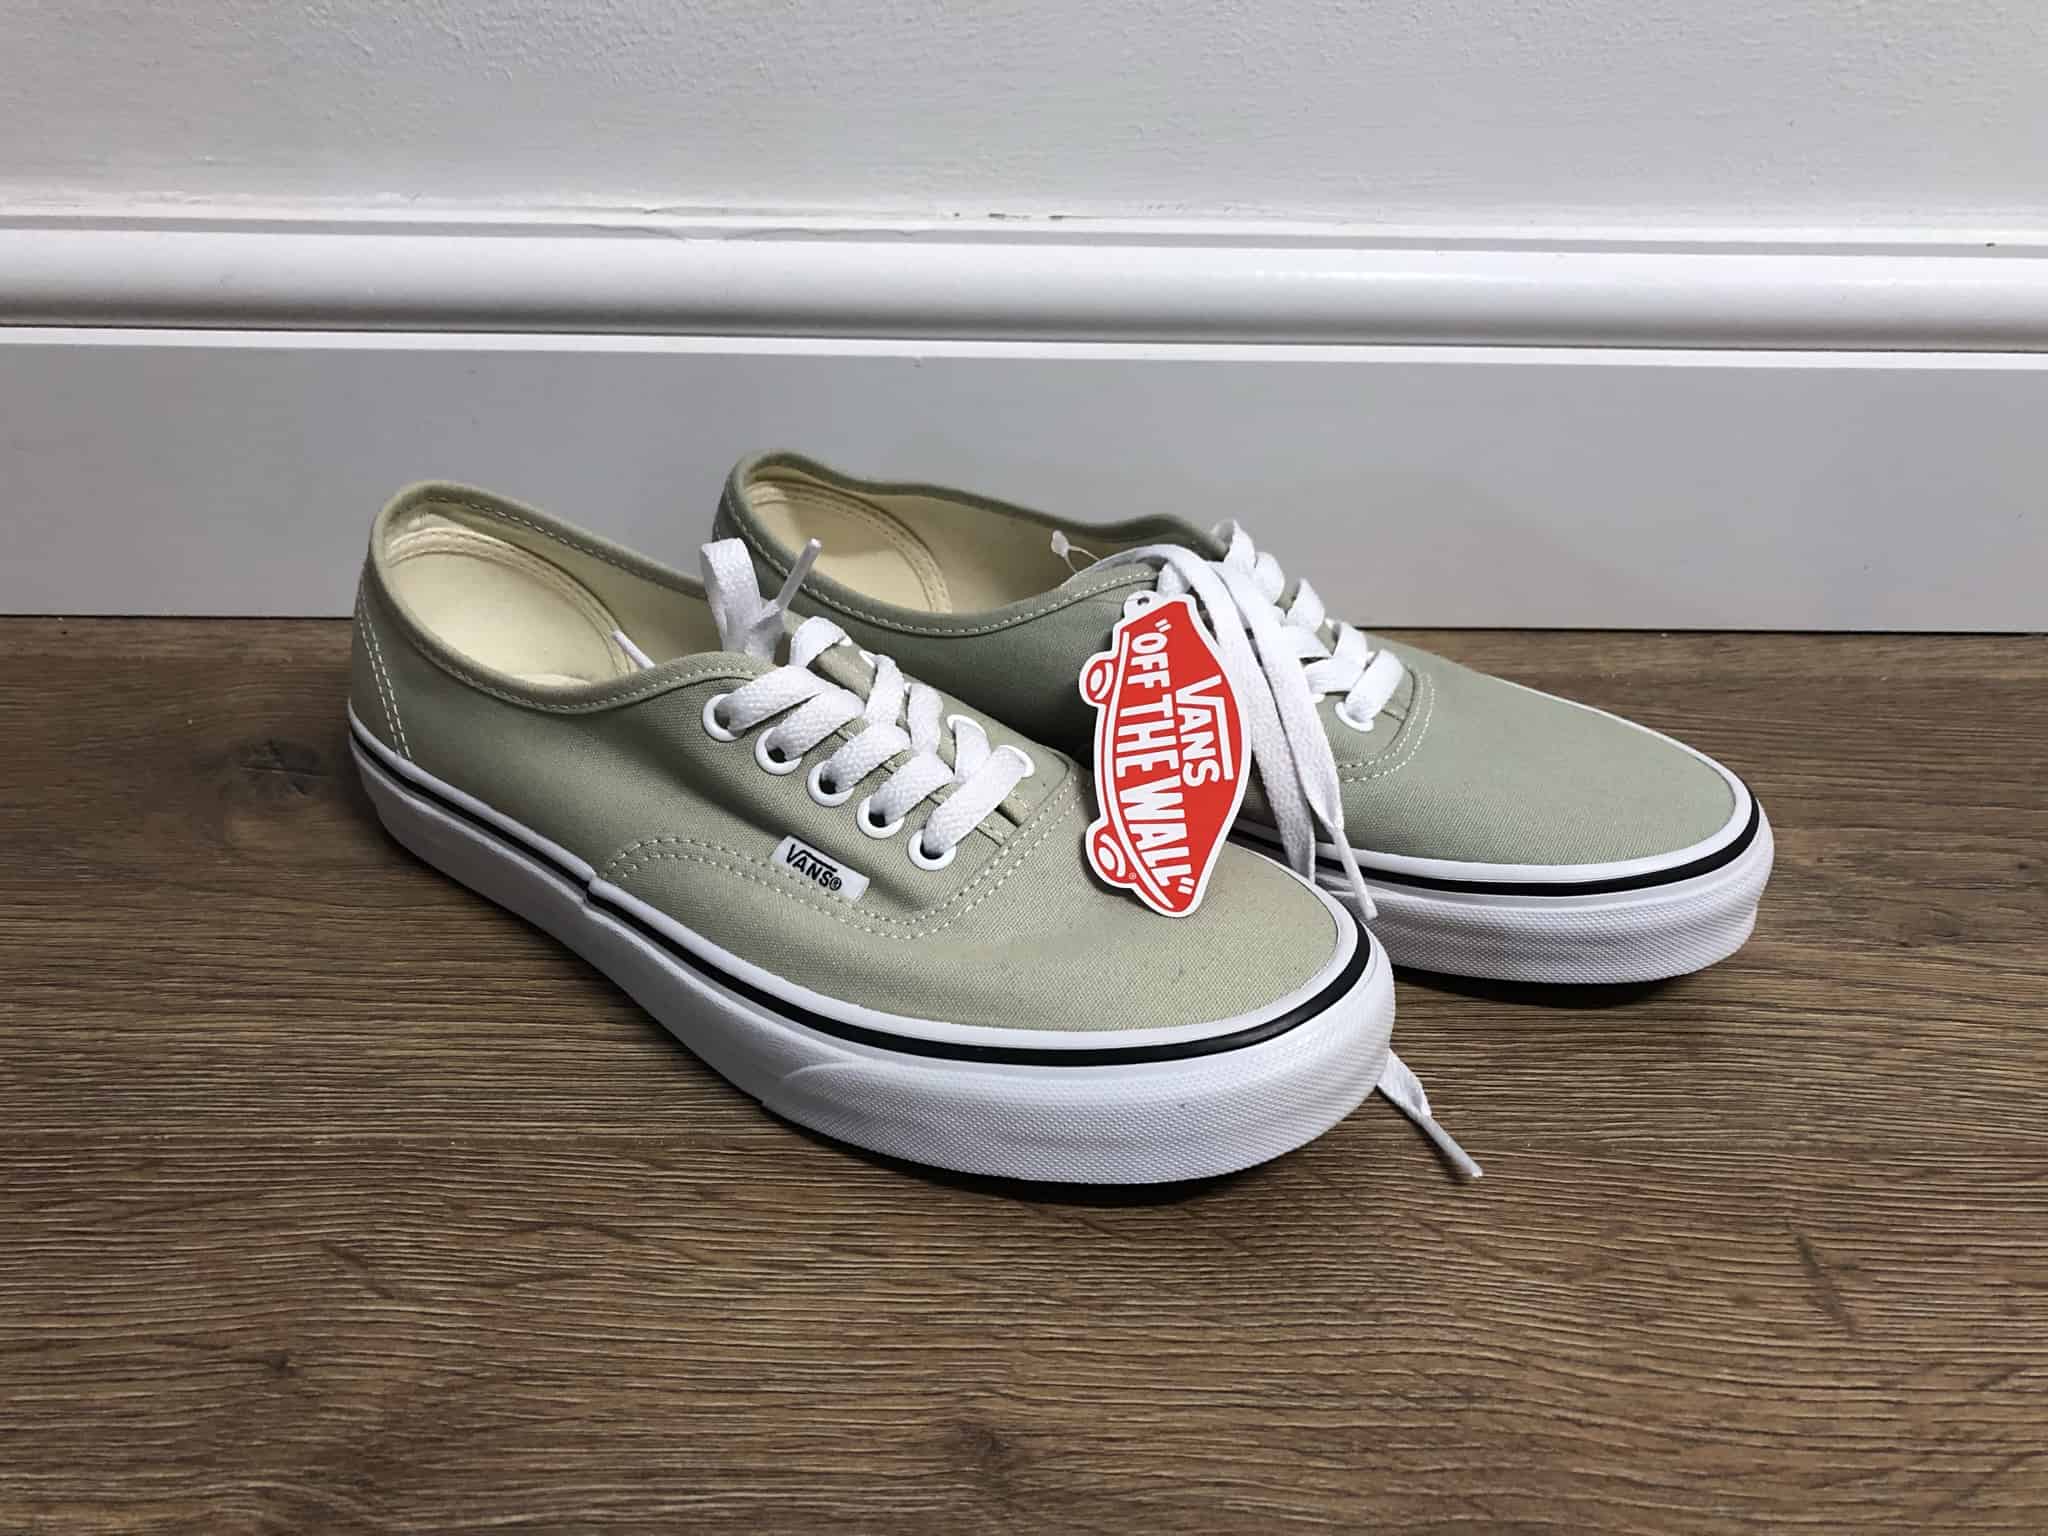 Vegan Vans?! Which Vans Are Vegan and which are the best? We've bought